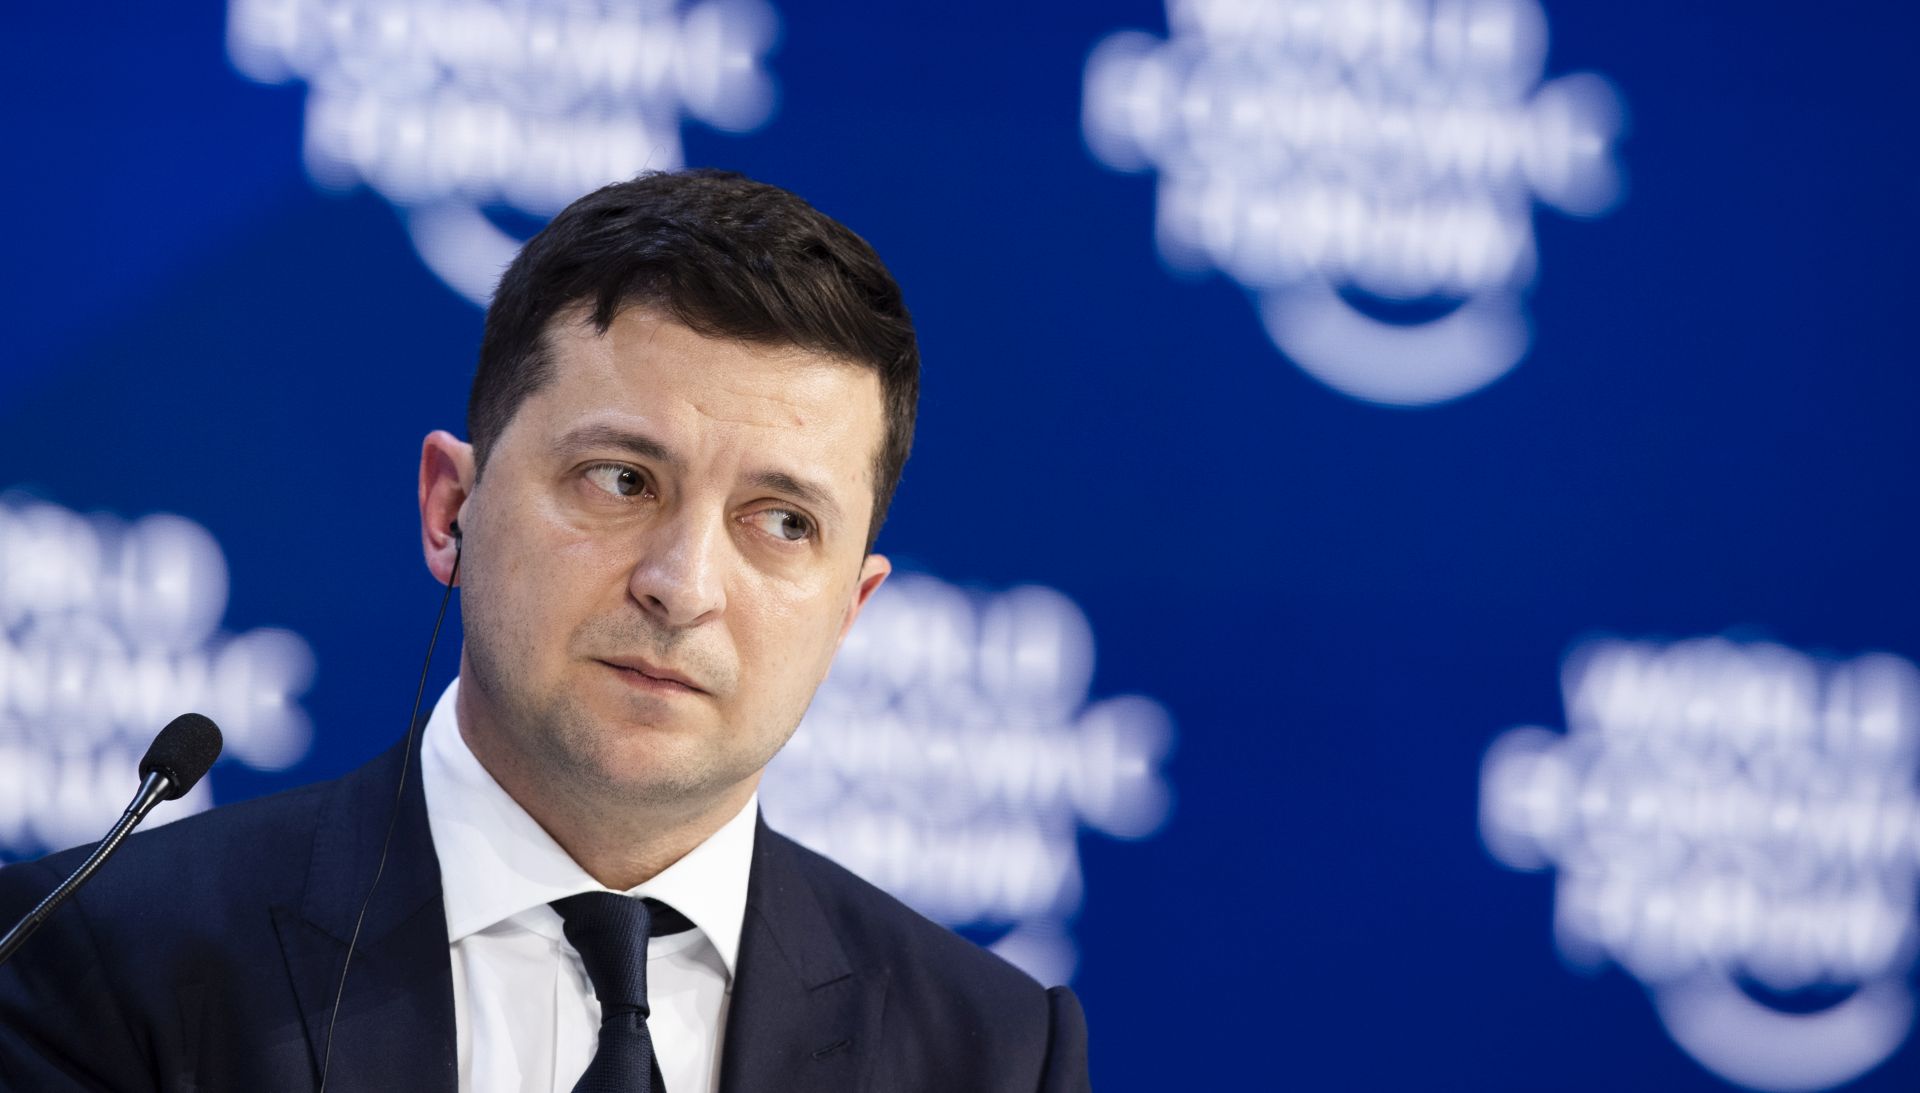 epa08151330 Volodymyr Zelensky, President of Ukraine during a plenary session during the 50th annual meeting of the World Economic Forum, WEF, in Davos, Switzerland, 20 January 2020. The meeting brings together entrepreneurs, scientists, corporate and political leaders in Davos from January 21 to 24.  EPA/GIAN EHRENZELLER